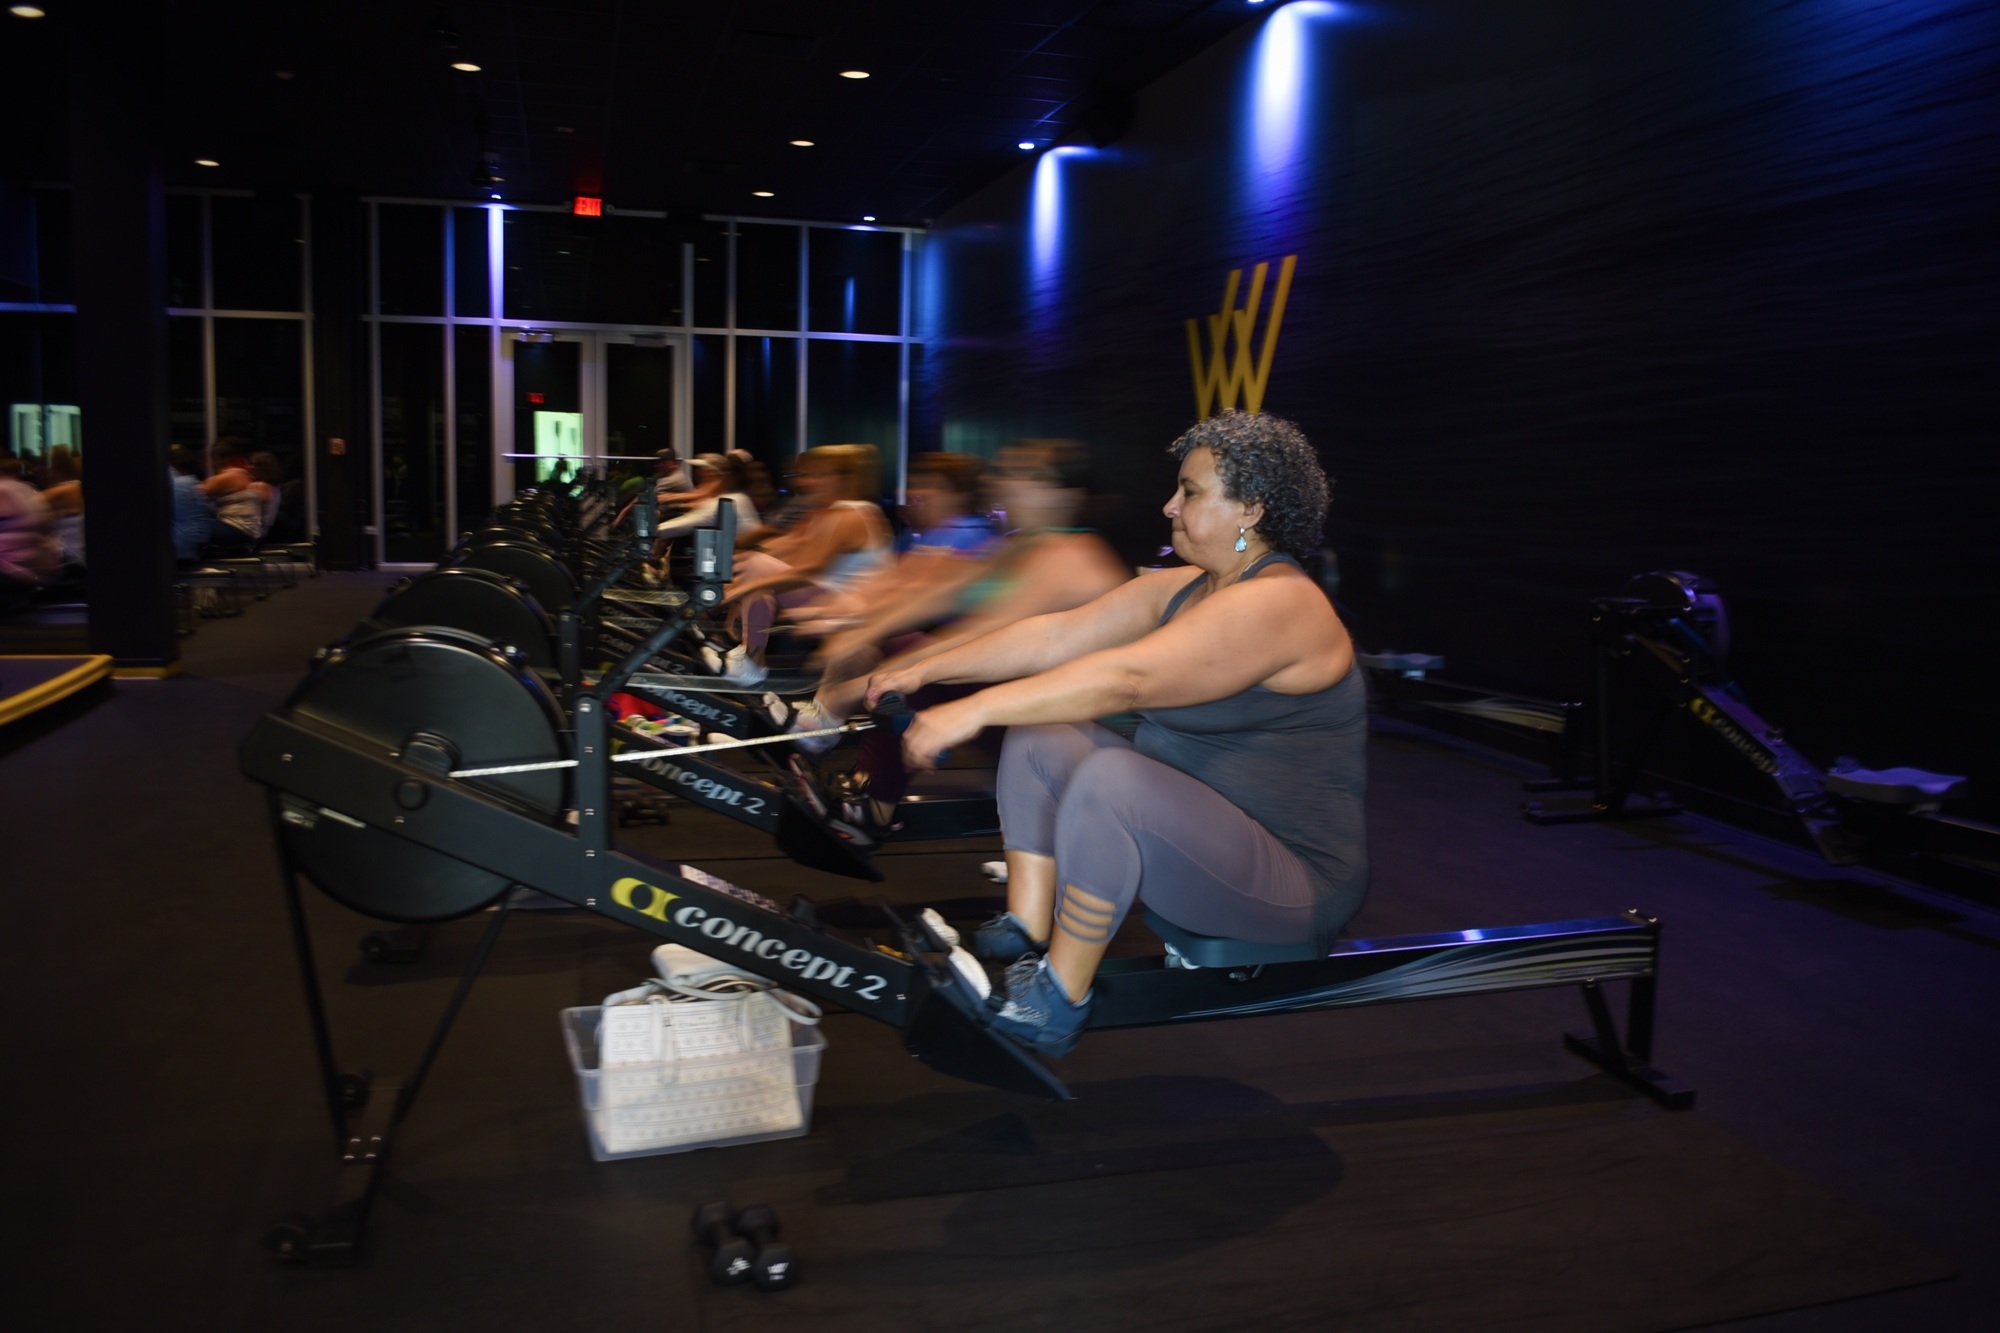 Karima Habity gave up hot yoga for fitness rowing two months ago.